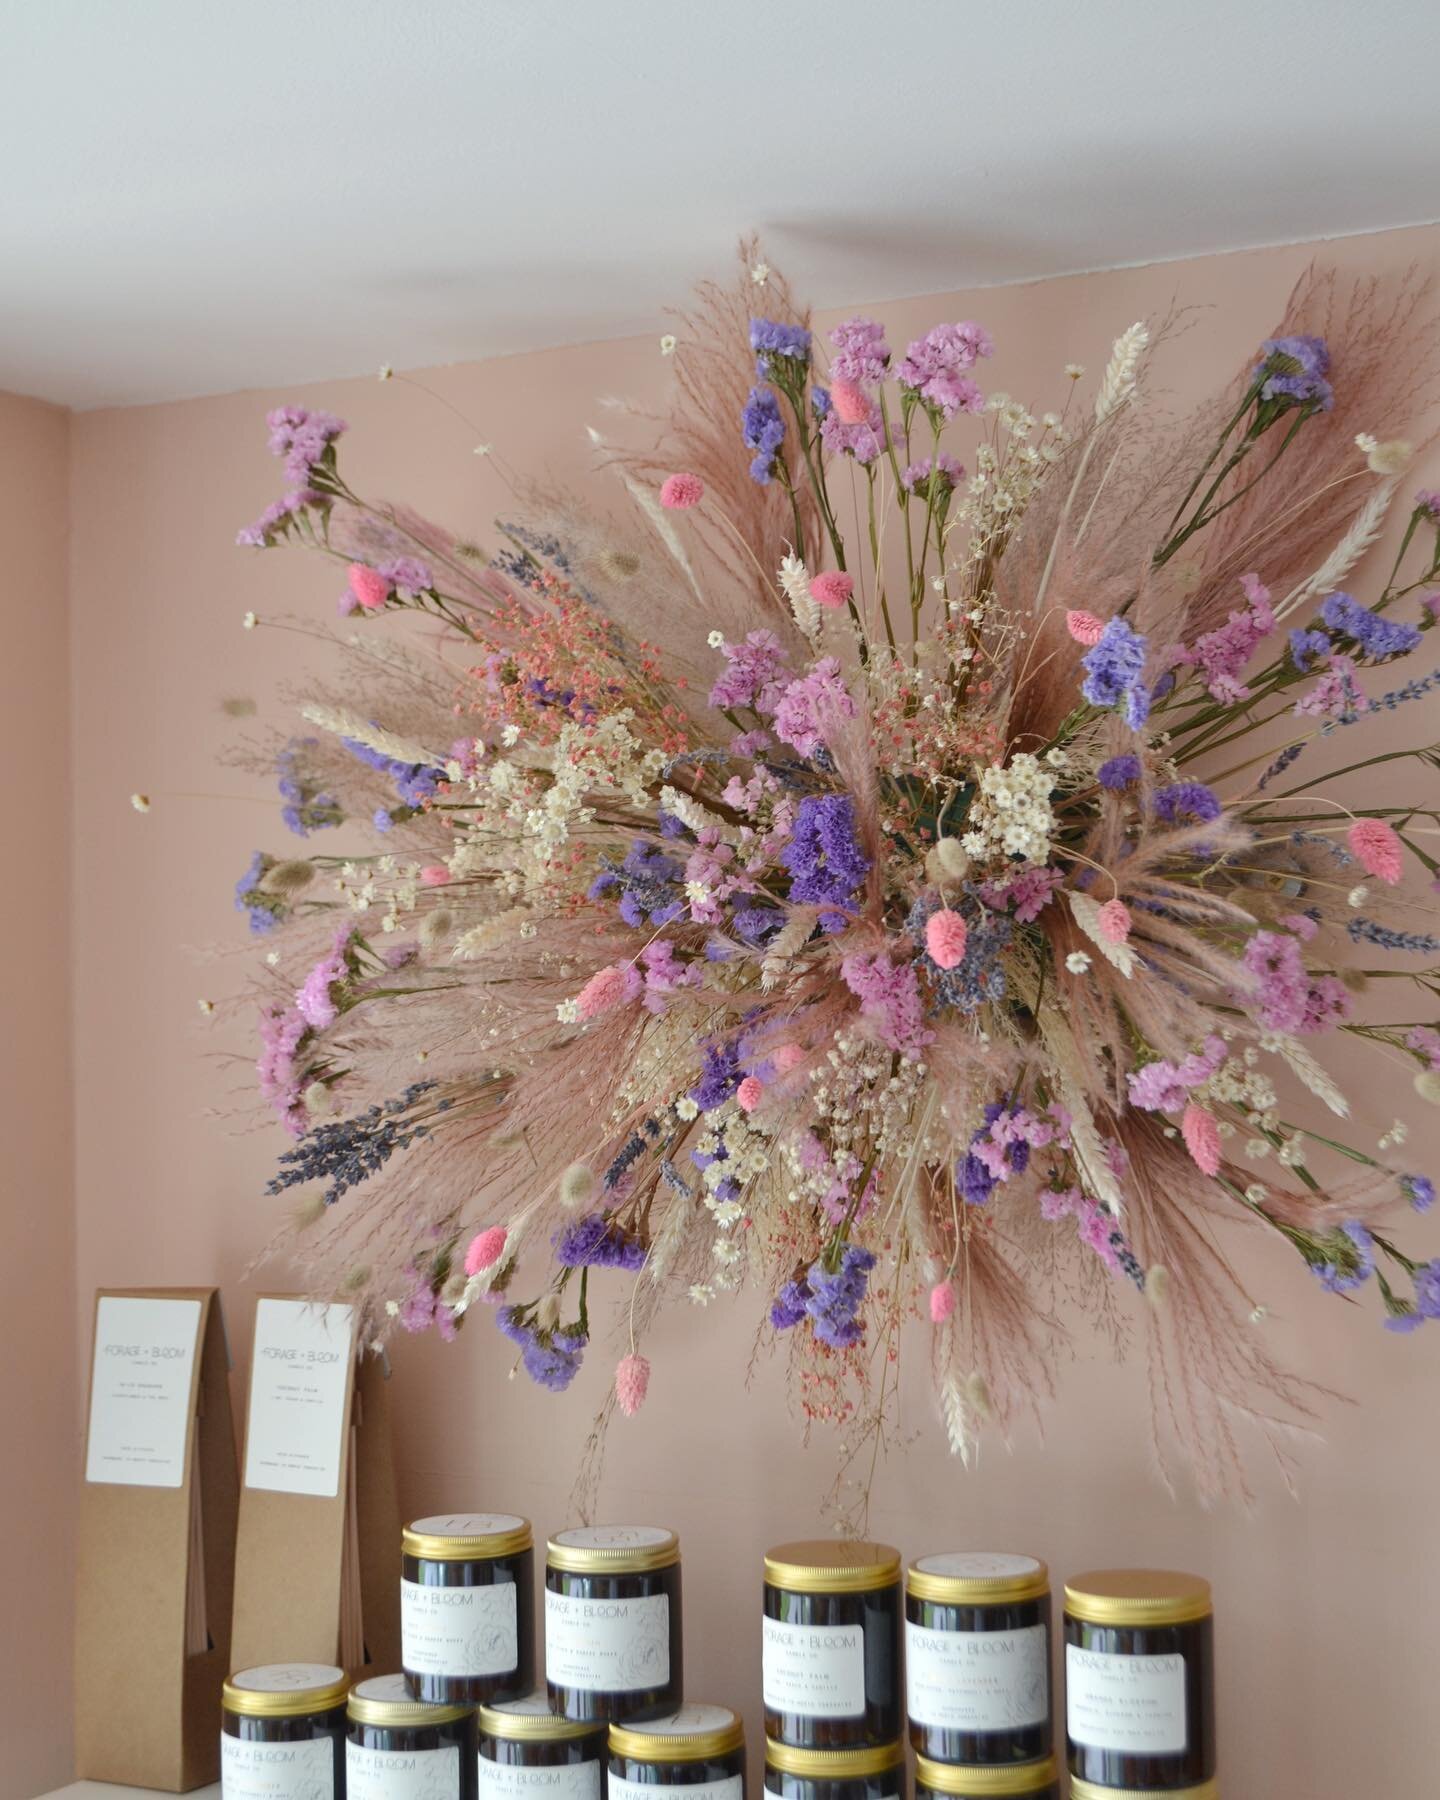 With spring just around the corner now&rsquo;s the perfect time to think about freshening up your space with a Dried Flower Installation 🌞 We travel UK wide - DM or email us to discuss your quote! 💐